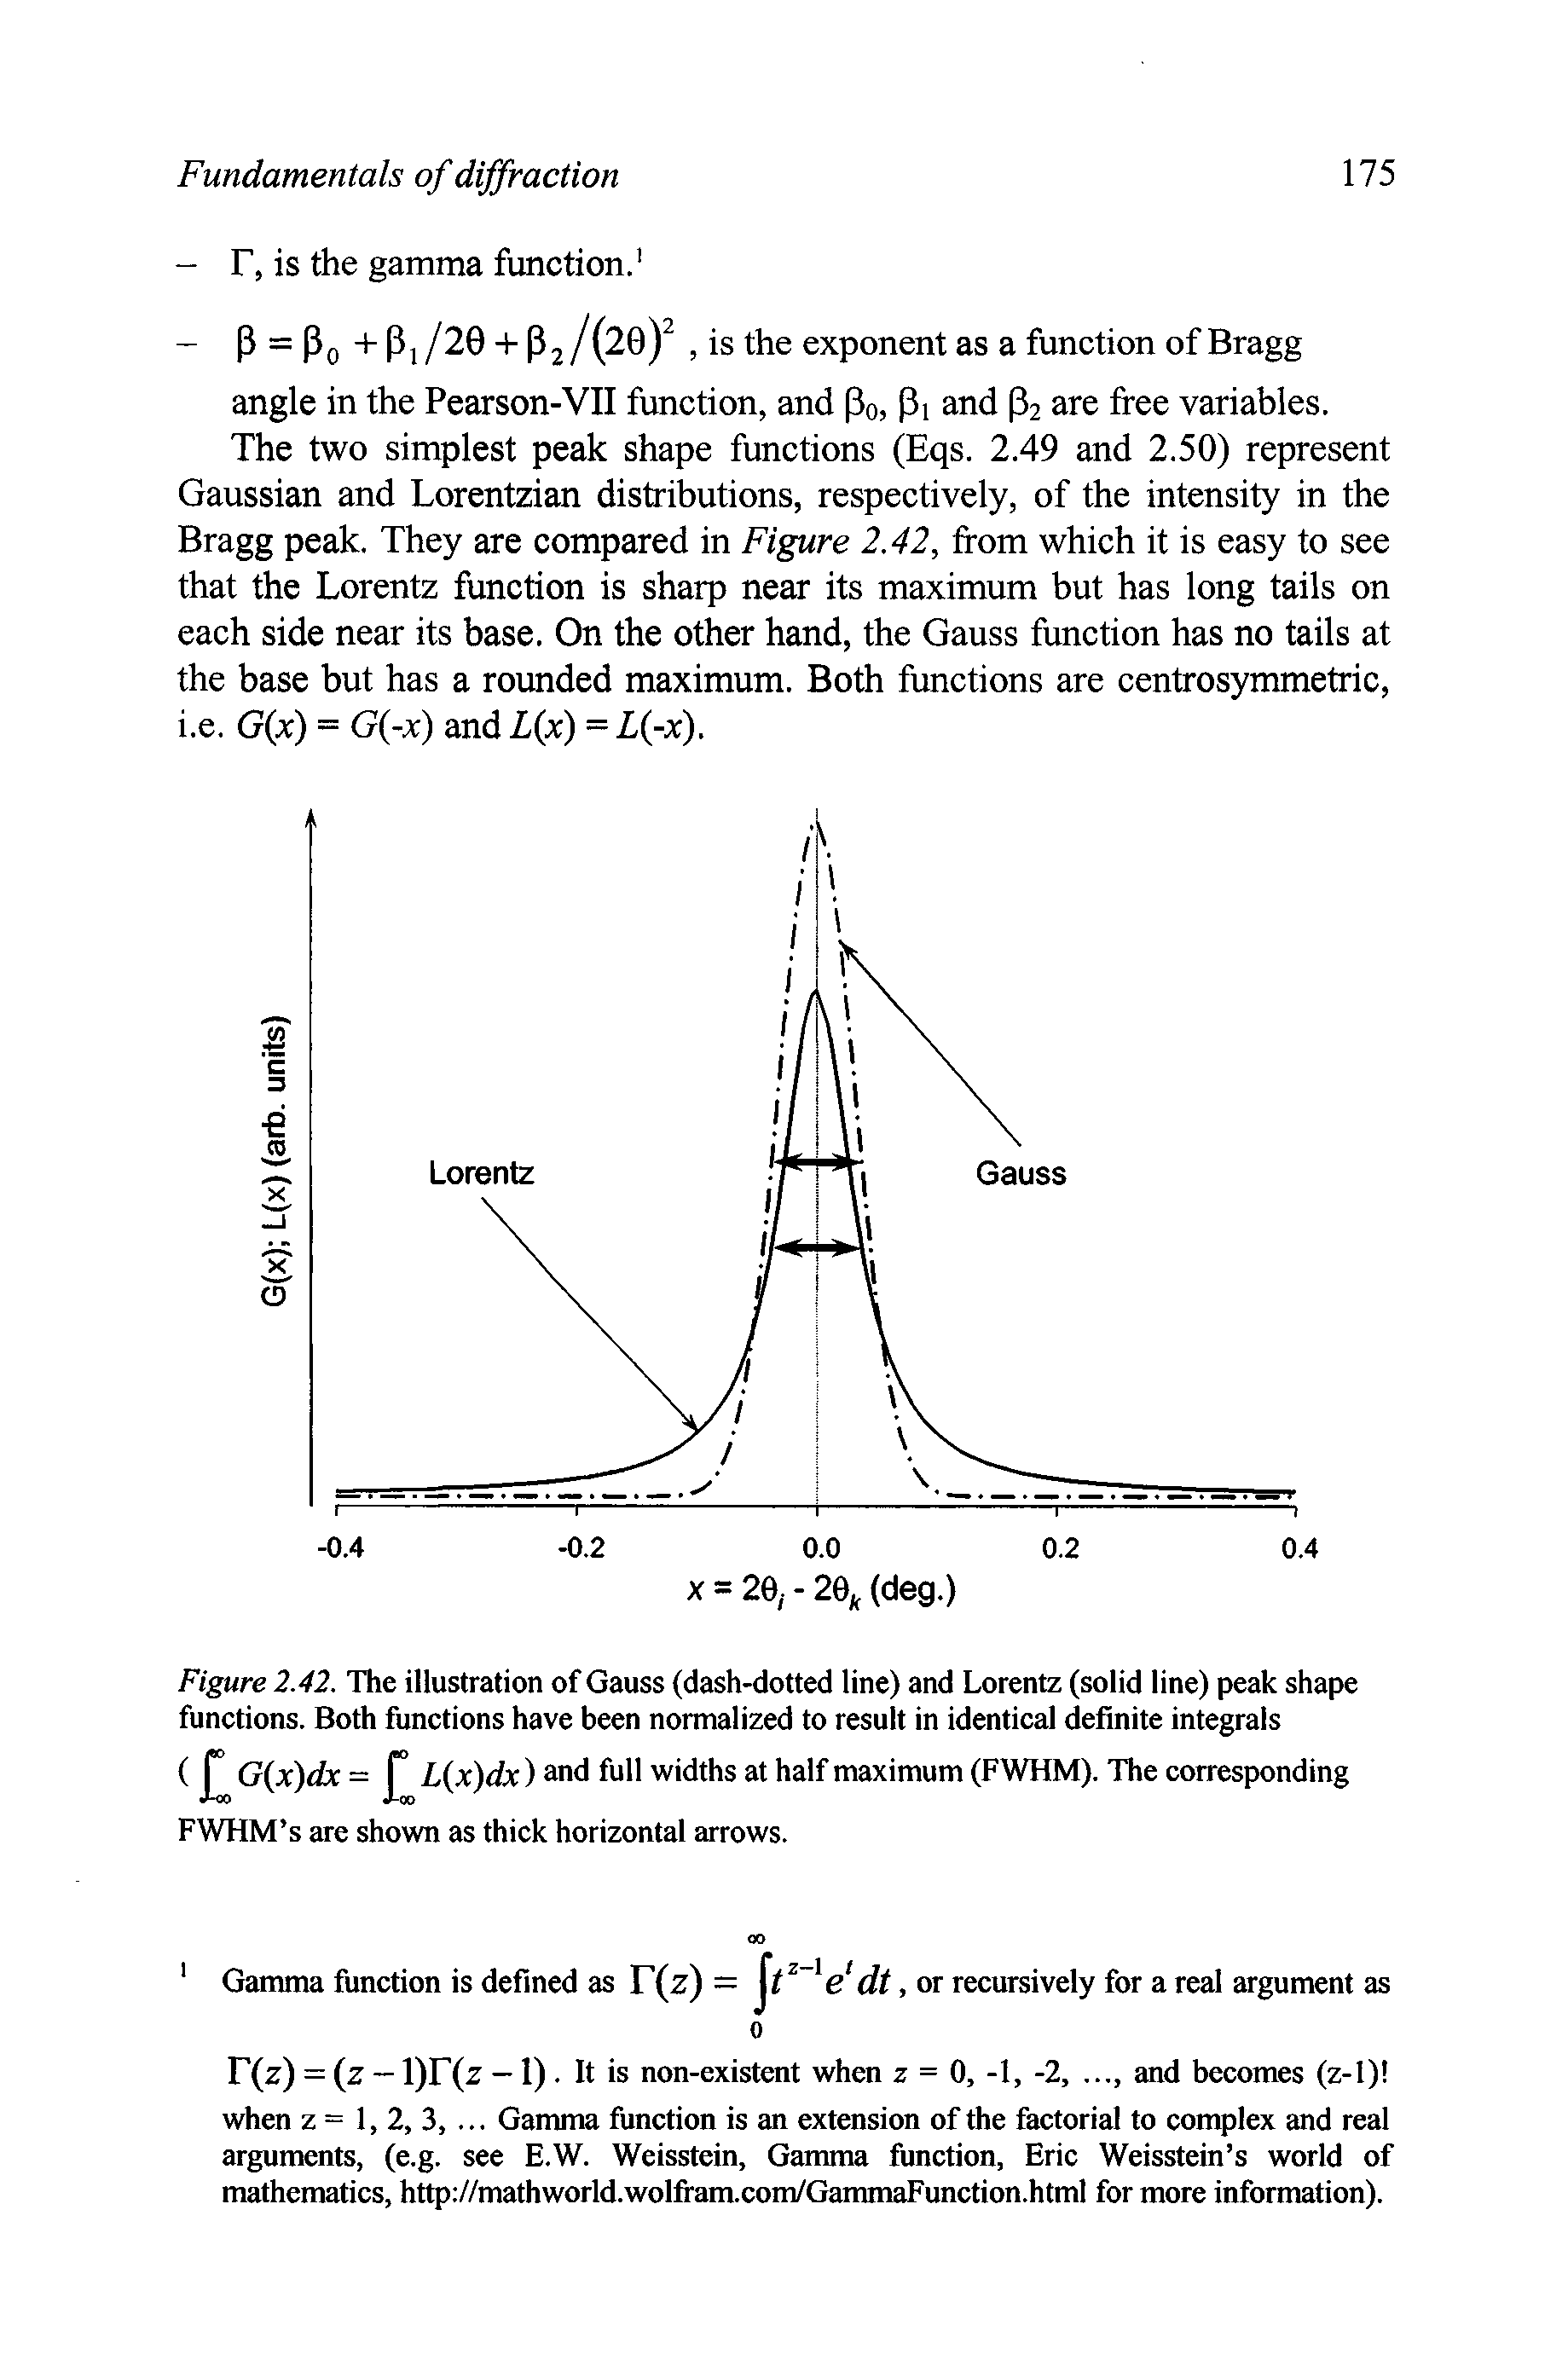 Figure 2.42. The illustration of Gauss (dash-dotted line) and Lorentz (solid line) peak shape functions. Both functions have been normalized to result in identical definite integrals...